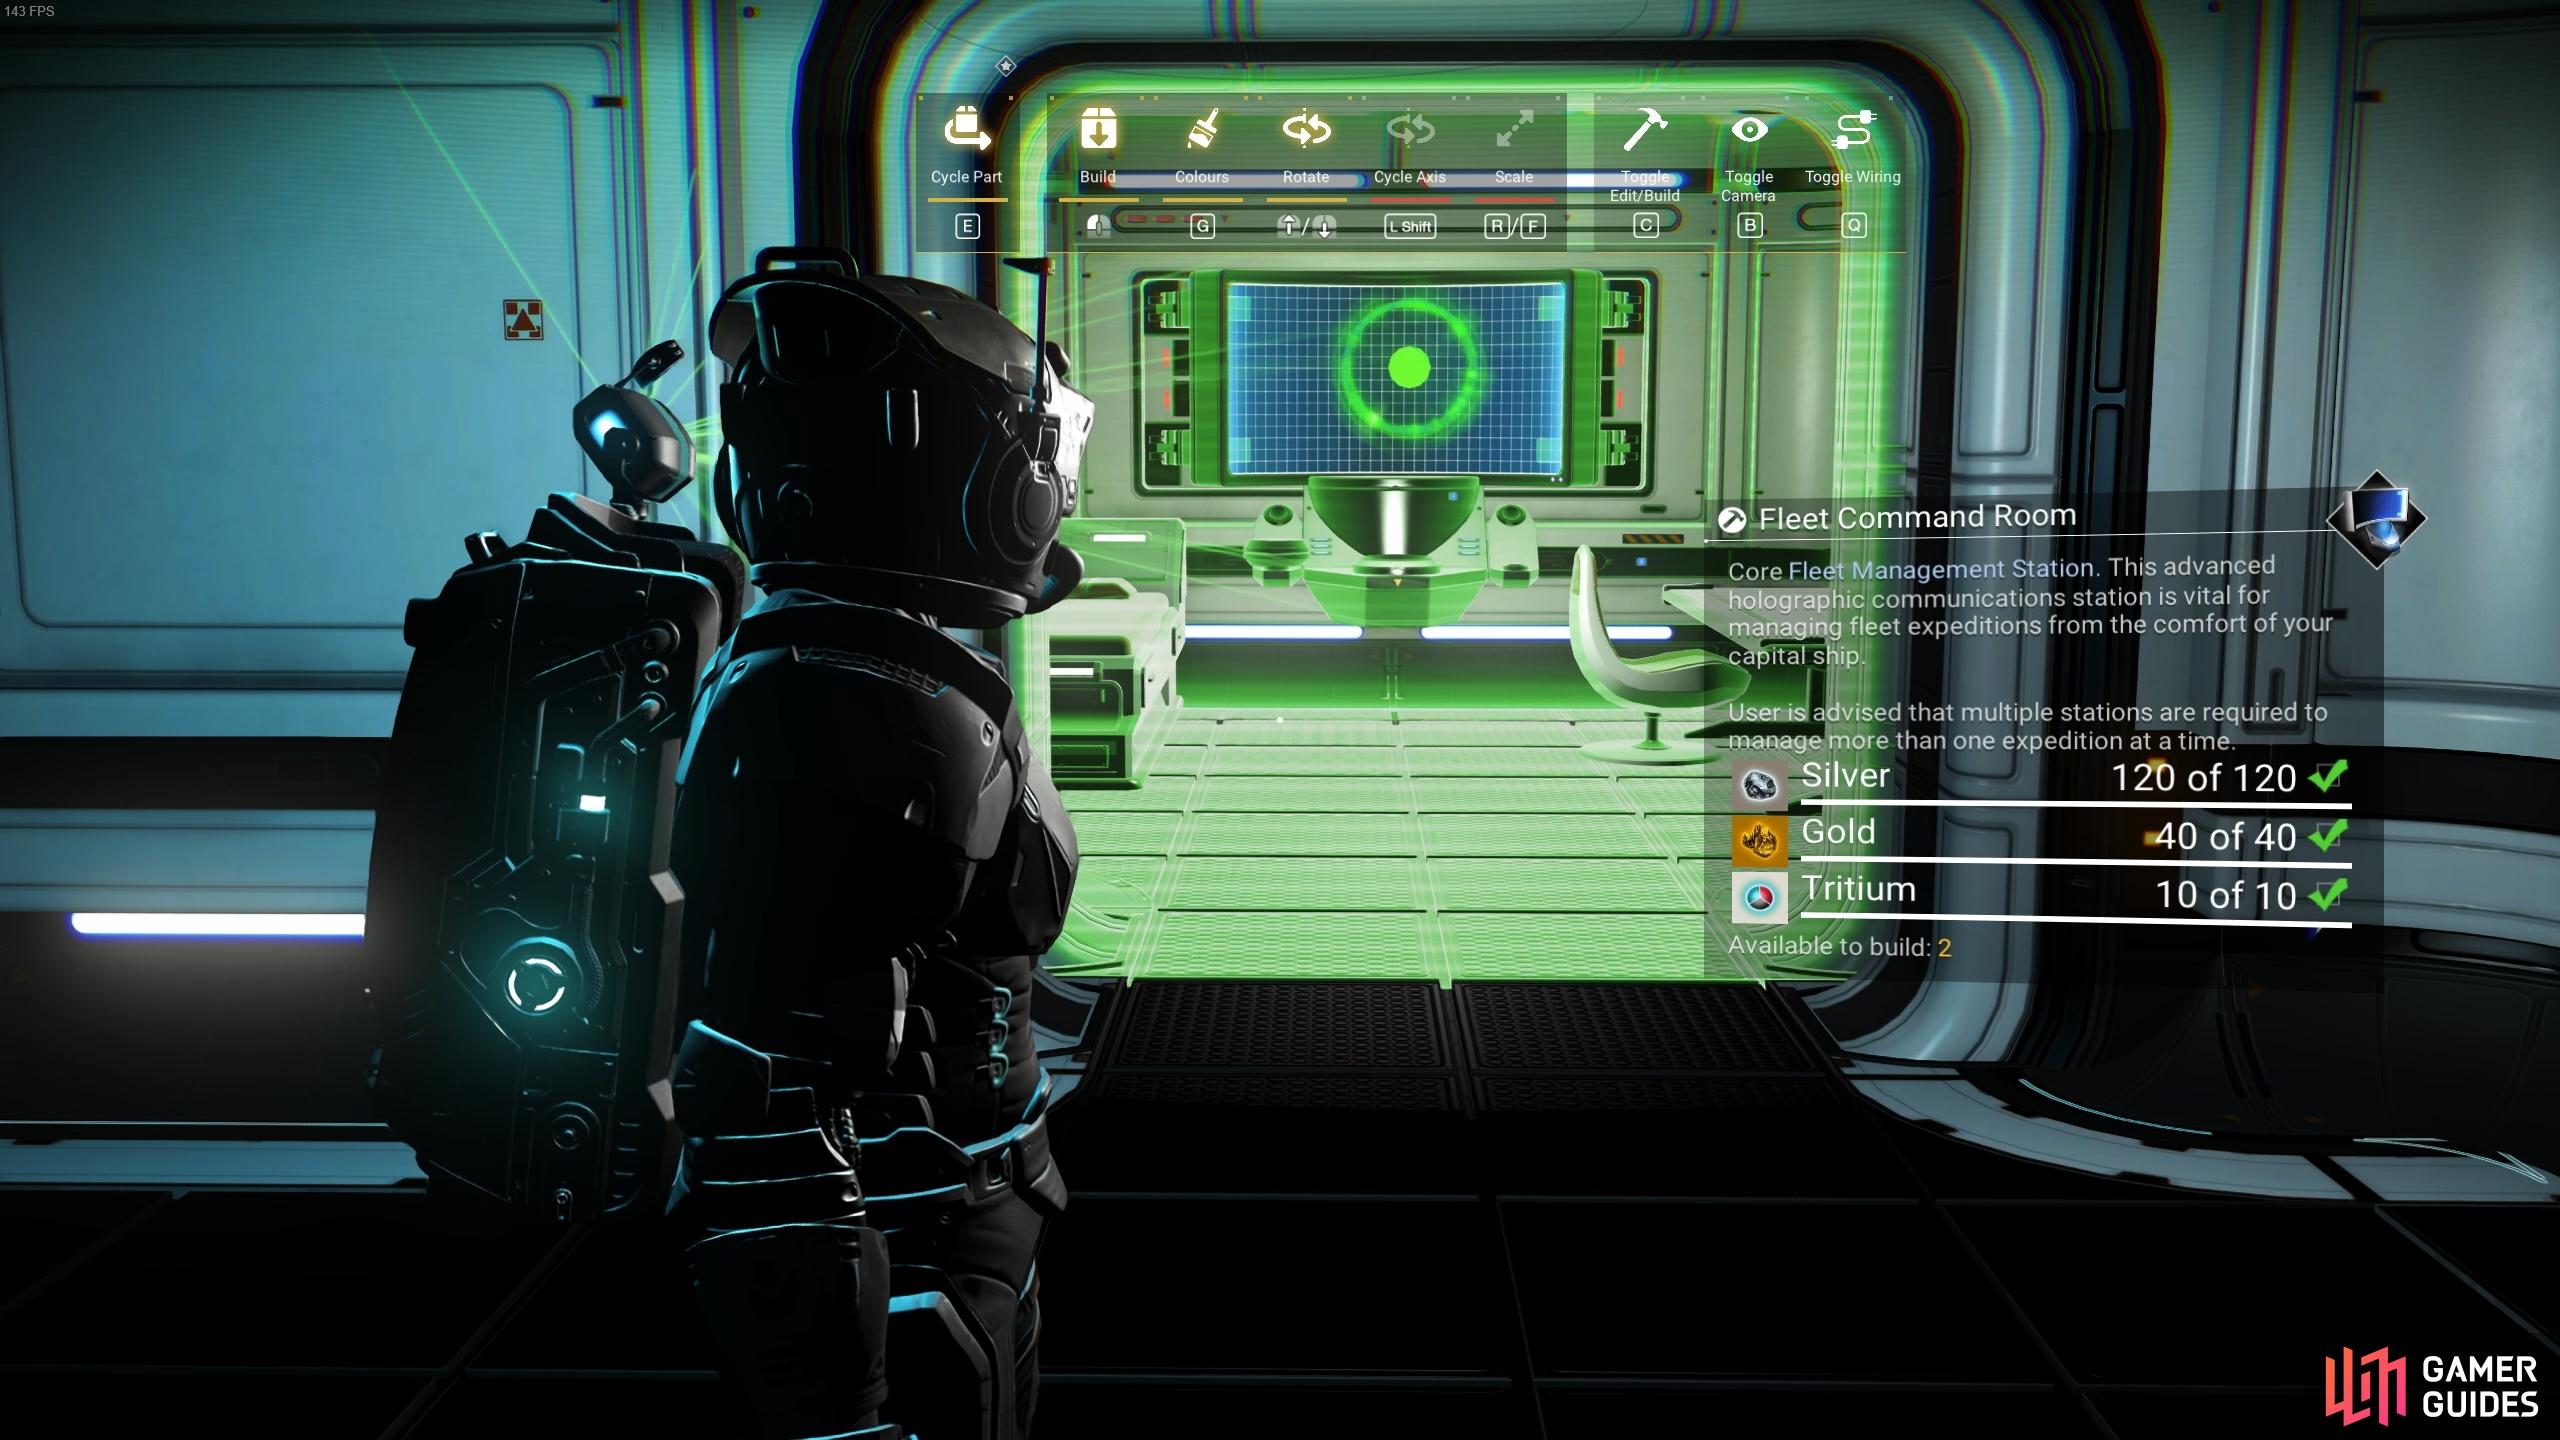 You can construct the Fleet Command Room in most pods available in the base building area of the Freighter.